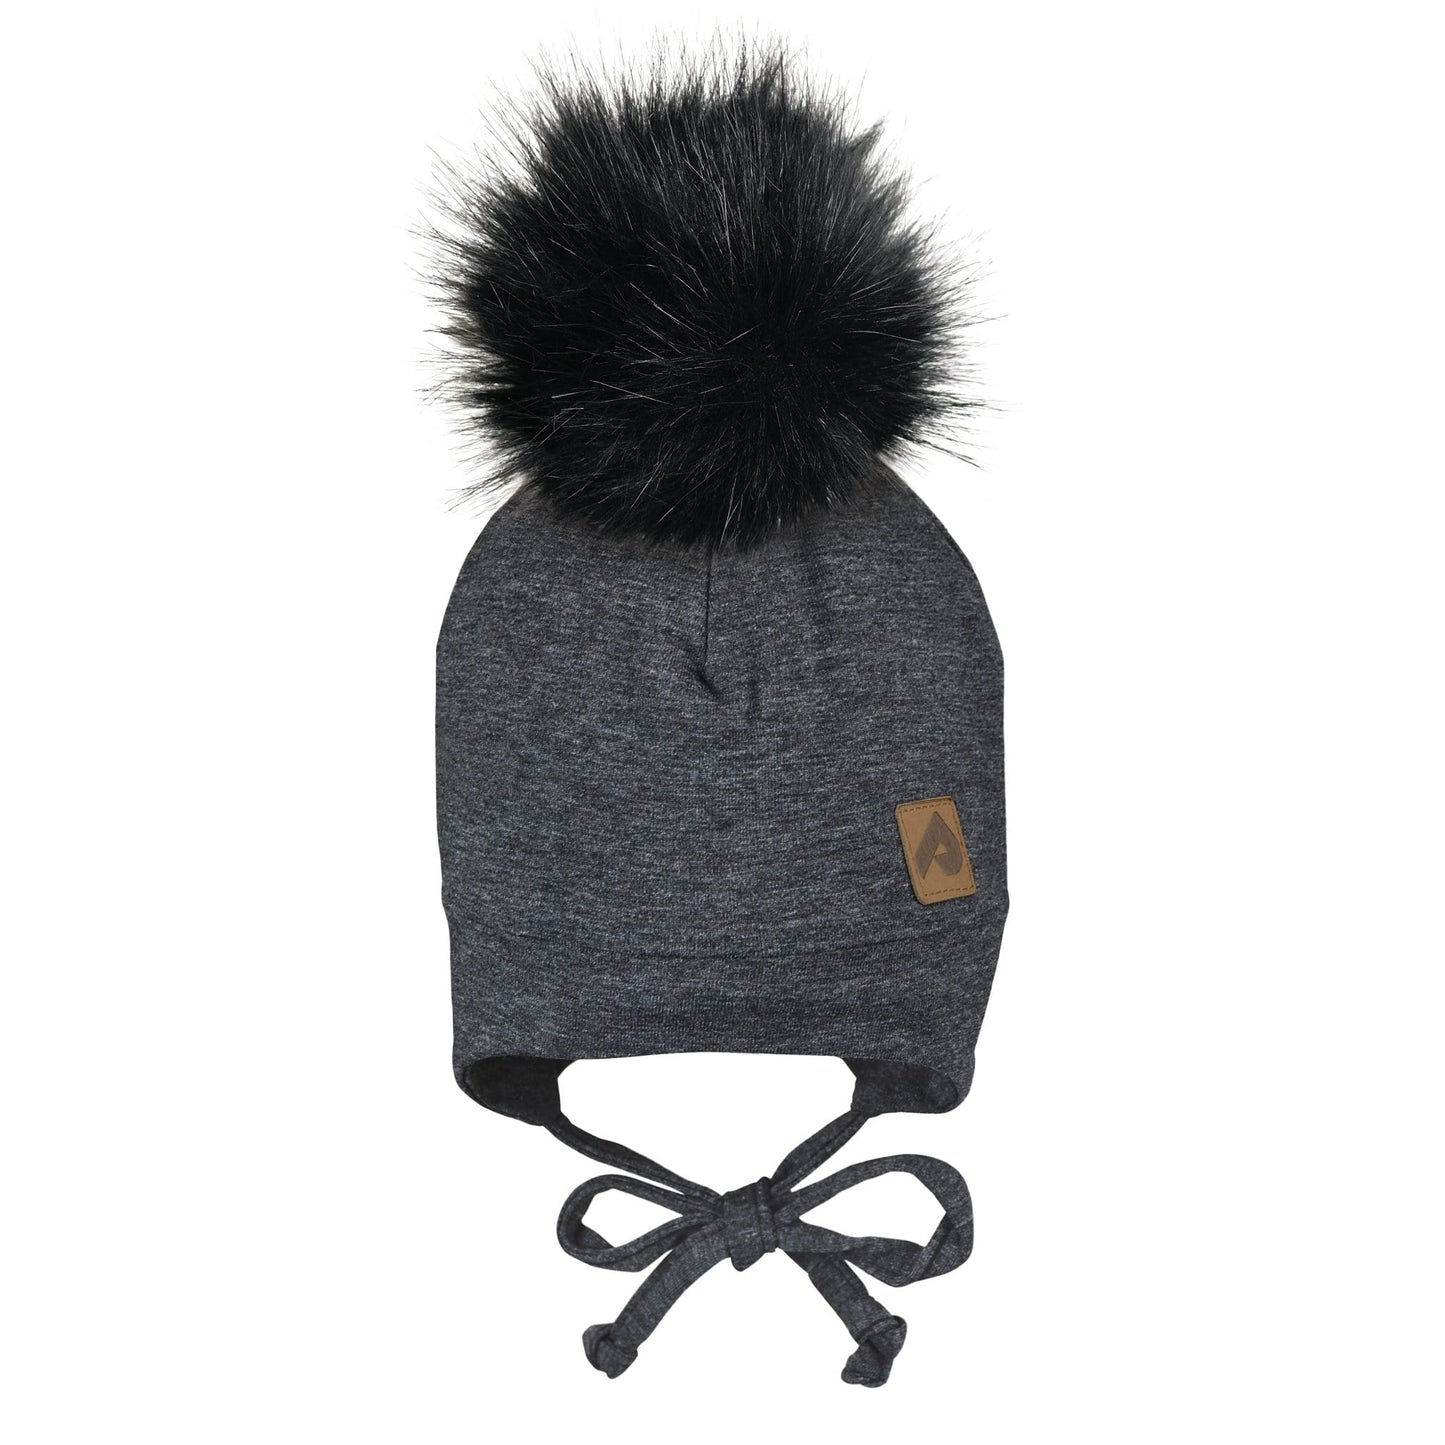 Cotton hat with fleece lining & ears - Black chiné